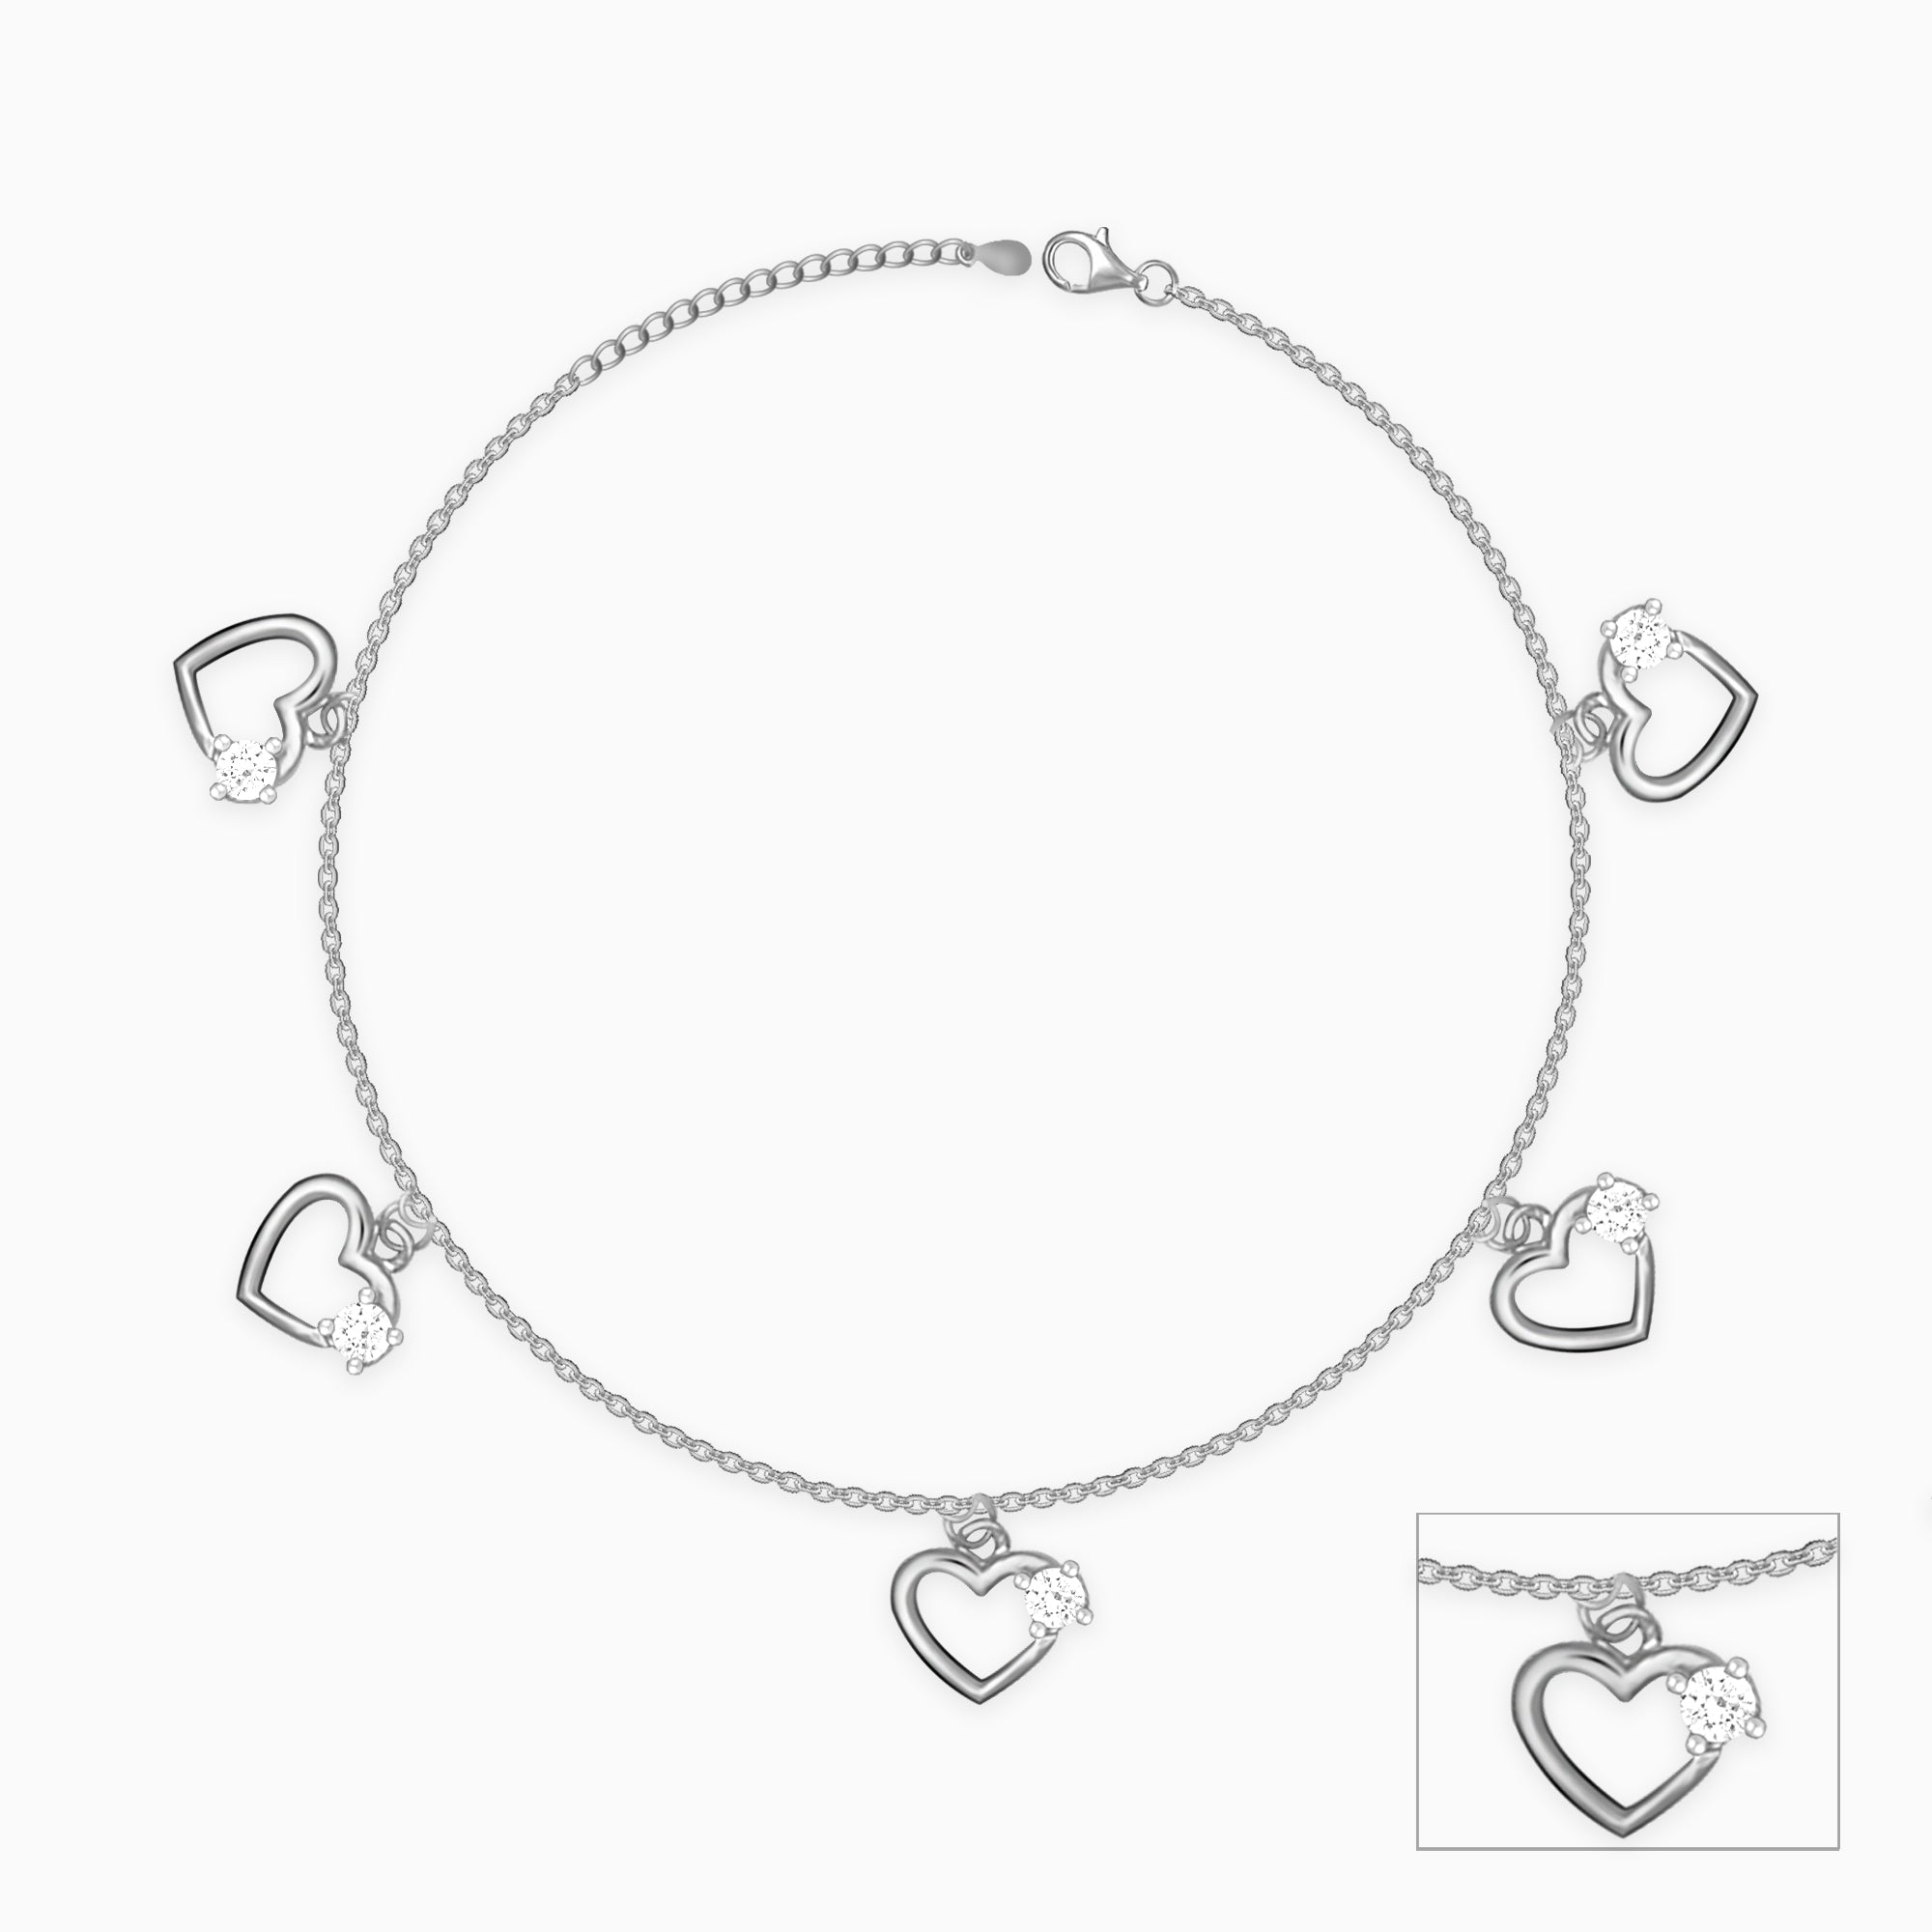 ATI Mexico Sterling Silver Chain Link Heart Charm Bracelet 7.25